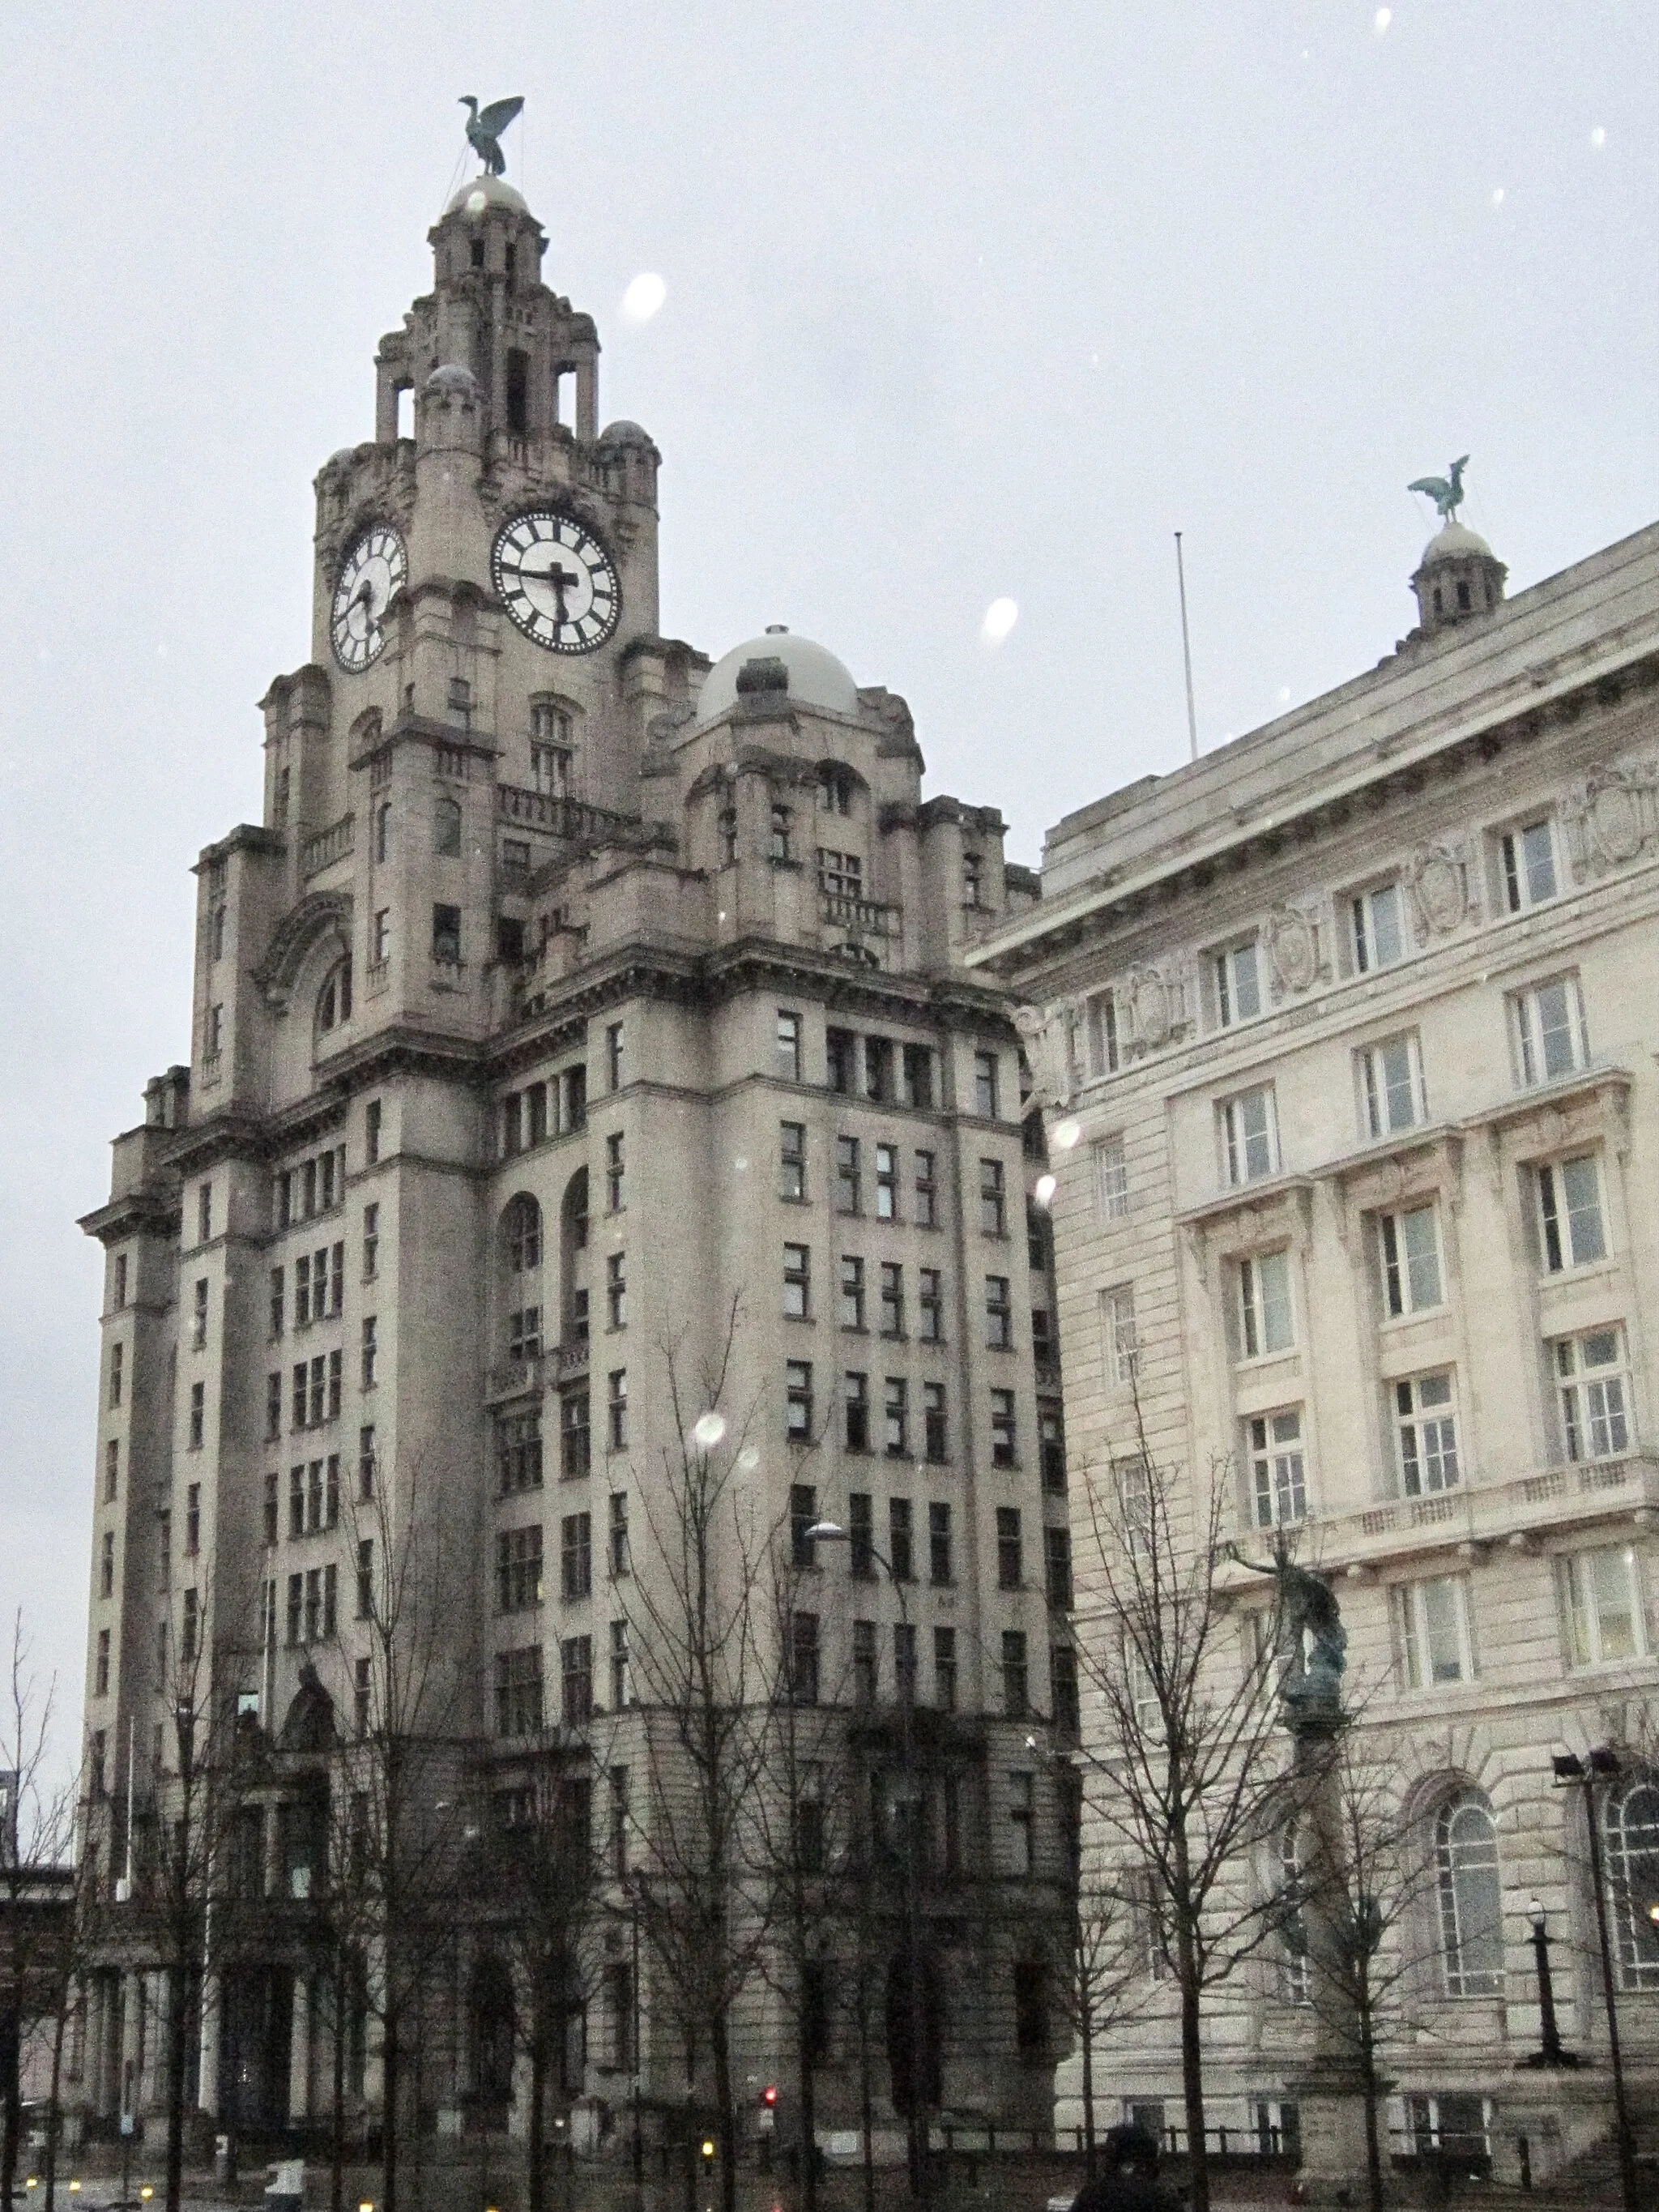 Photo showing: The Royal Liver Building is a Grade I listed building in Liverpool, England  and is a symbol of the Liverpool City Region, and so too, is the Liver Birds (sculptures) on top of the building.
The Liver Bird appears on the seals and logos for a plethora of businesses in the Liverpool Bay Area and on the Liverpool Football Club.
The Royal Liver Building has the largest clock faces in the UK.
The two Liver Birds(Mythical creatures) that stand proudly on top of the building, named Bertie and Bella, are said to protect the City. 
Bertie faces the city, keeping a watchful eye on the citizens of Liverpoool.
Legend has it that if those two the Liver Birds fly off, the City will cease to exist.
Royal Liver Building
Liverpool Watefront,
Liverpool, L3 1HU
England, United Kingdom
Architect- Walter Aubrey Thomas
Building Completion- 1911
http://www.royalliverbuilding.com/

https://www.visitliverpool.com/listing/royal-liver-building-360/44496101/